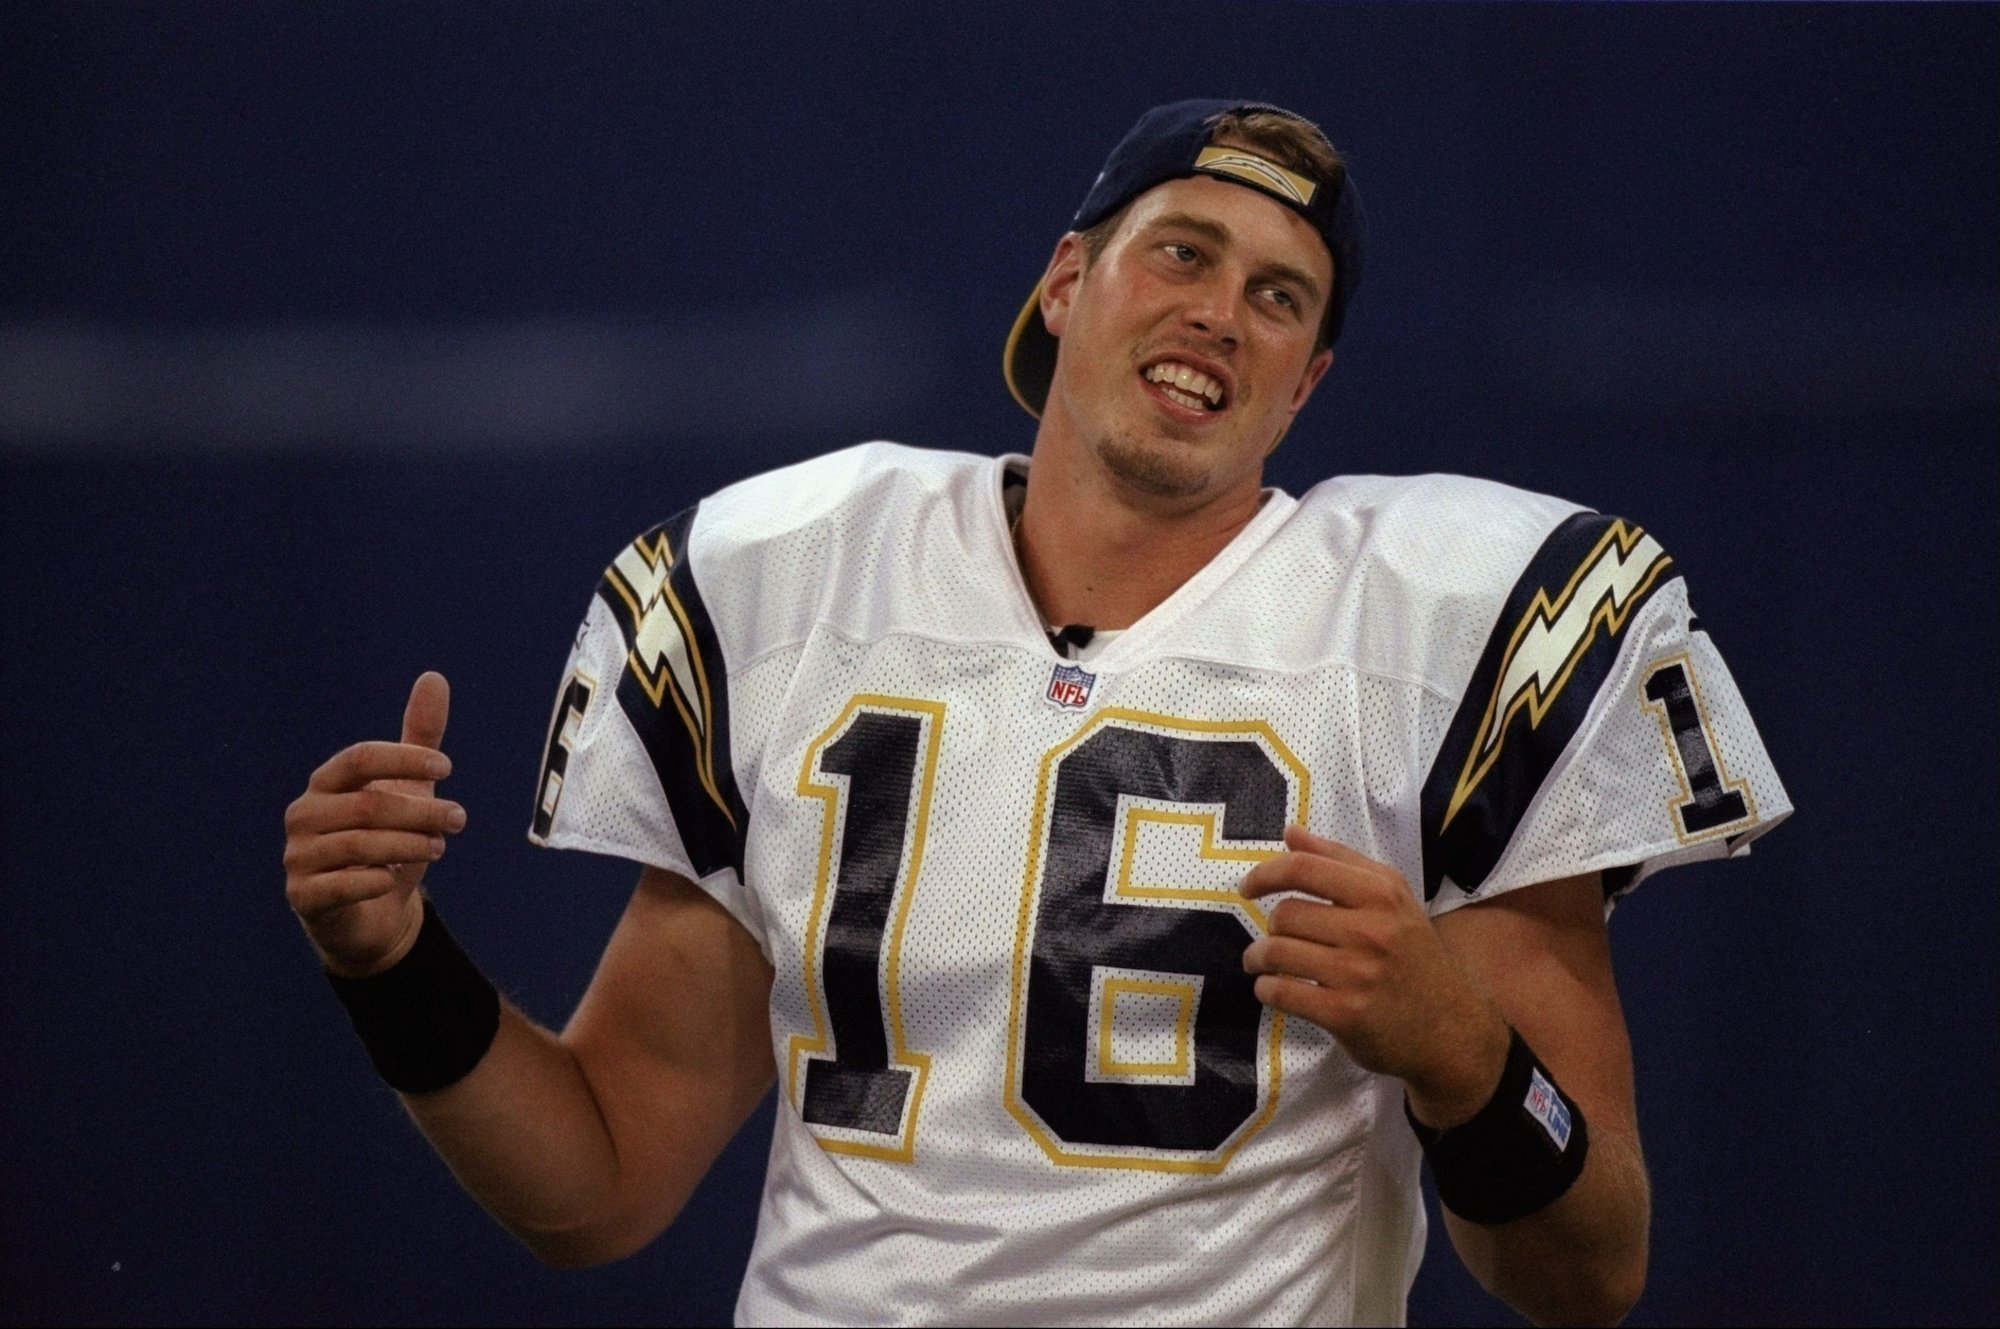 11 of the Biggest NFL Draft Busts of All Time